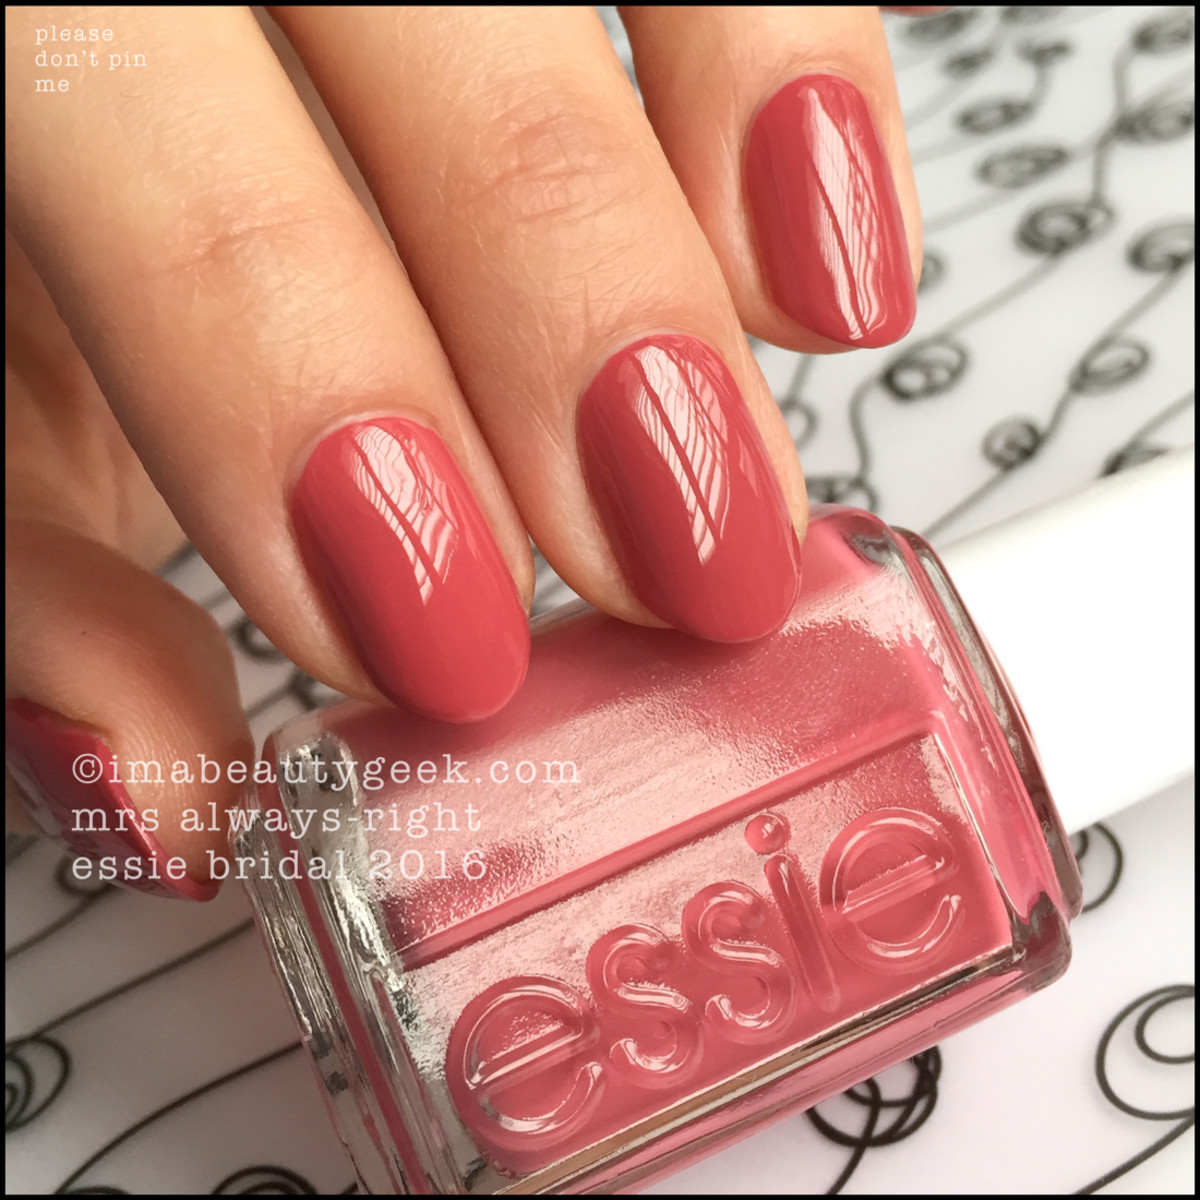 Essie Bridal 2016 Collection Swatches and Review_Essie Mrs Always Right